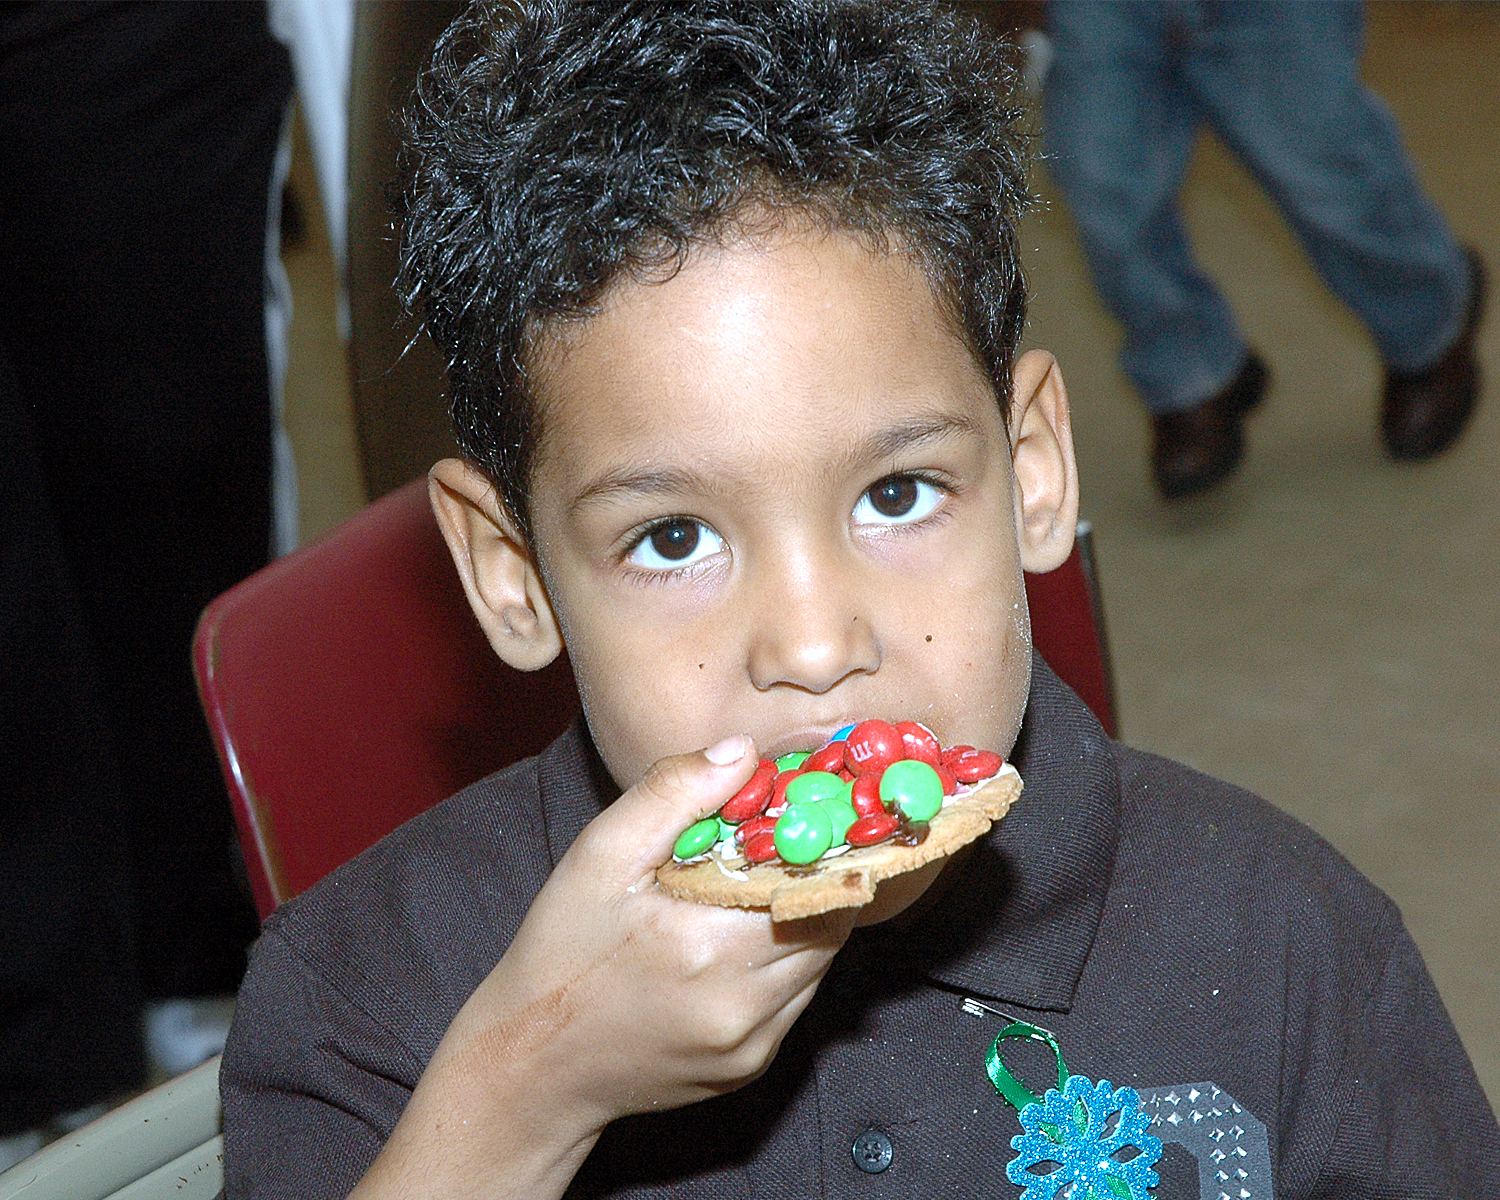 An attendee enjoying a cookie that he decorated